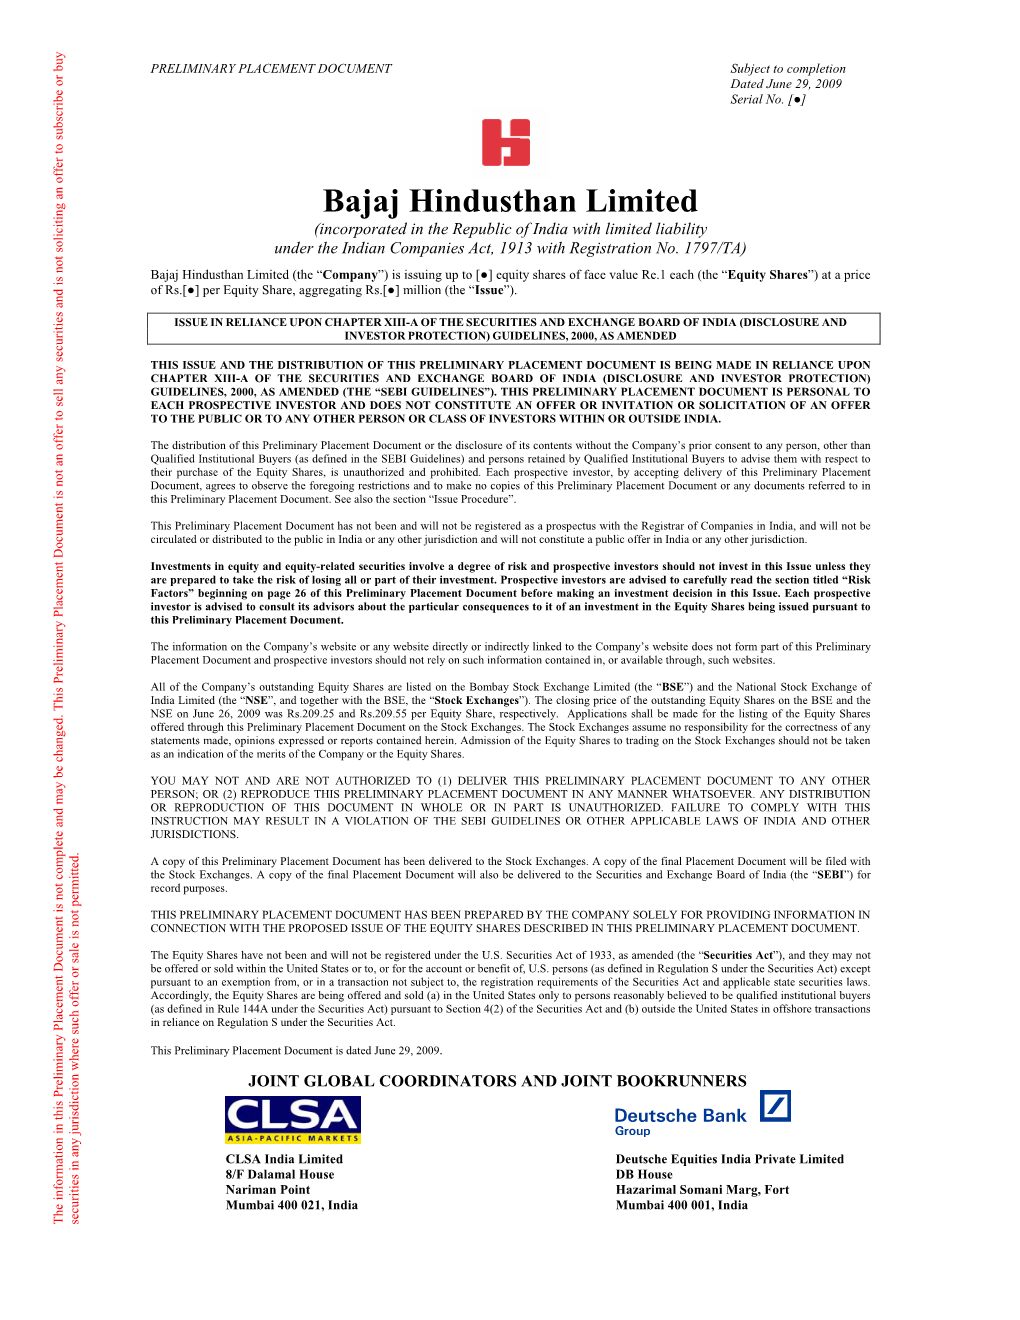 Bajaj Hindusthan Limited (Incorporated in the Republic of India with Limited Liability Under the Indian Companies Act, 1913 with Registration No